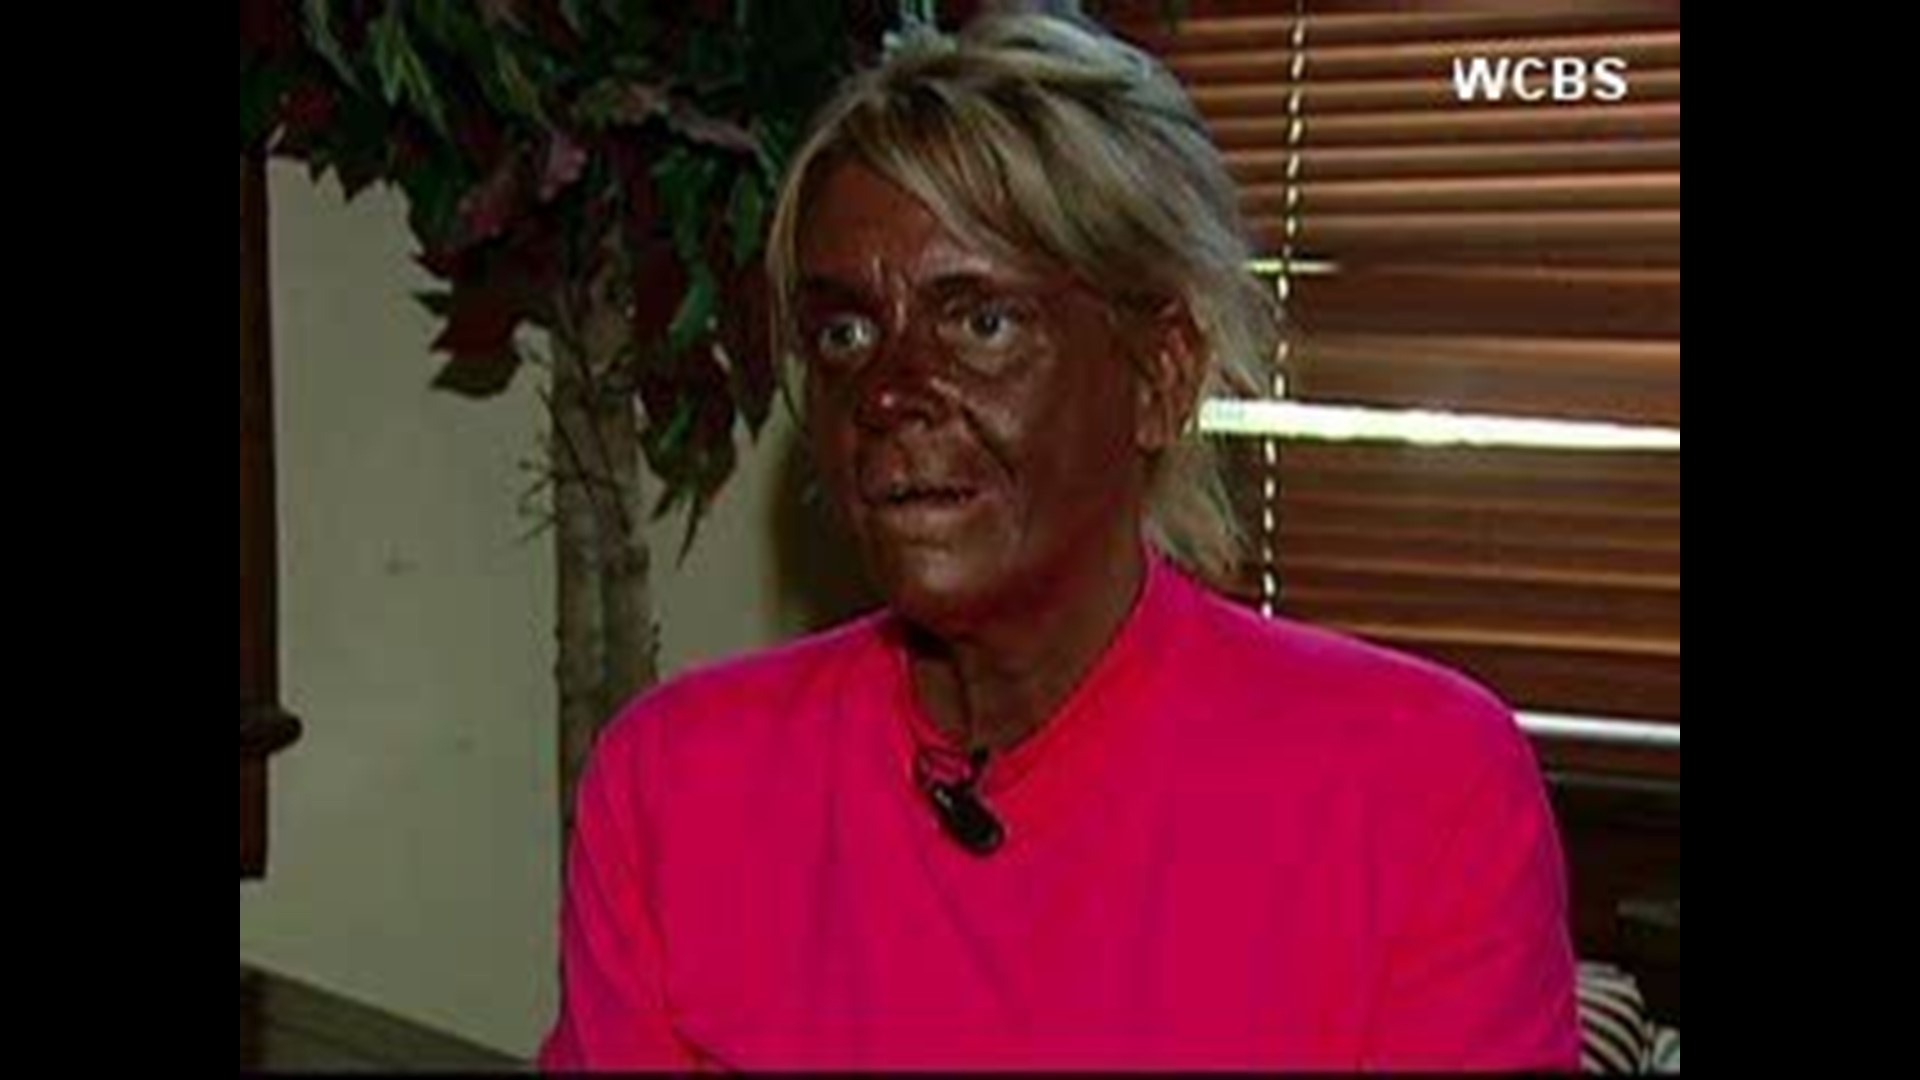 CNN: Mom accused of taking daughter to tanning bed